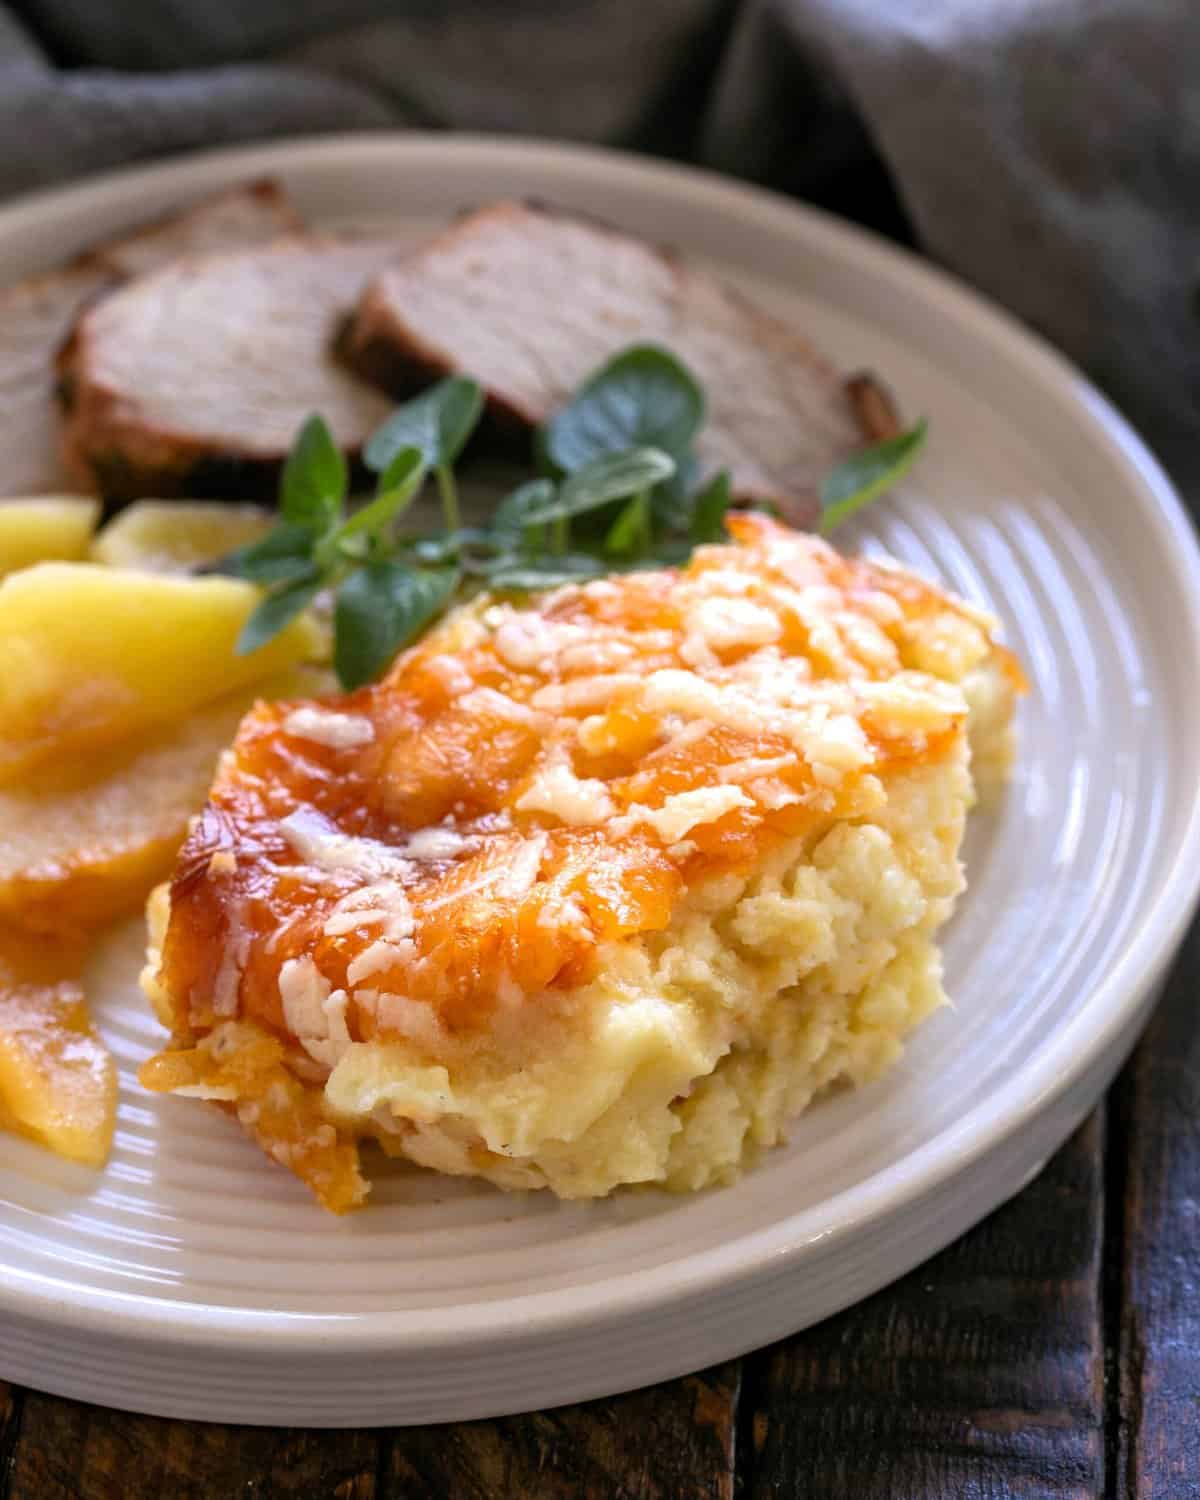 Serving of potato casserole on a white dinner plate with pork and apples.